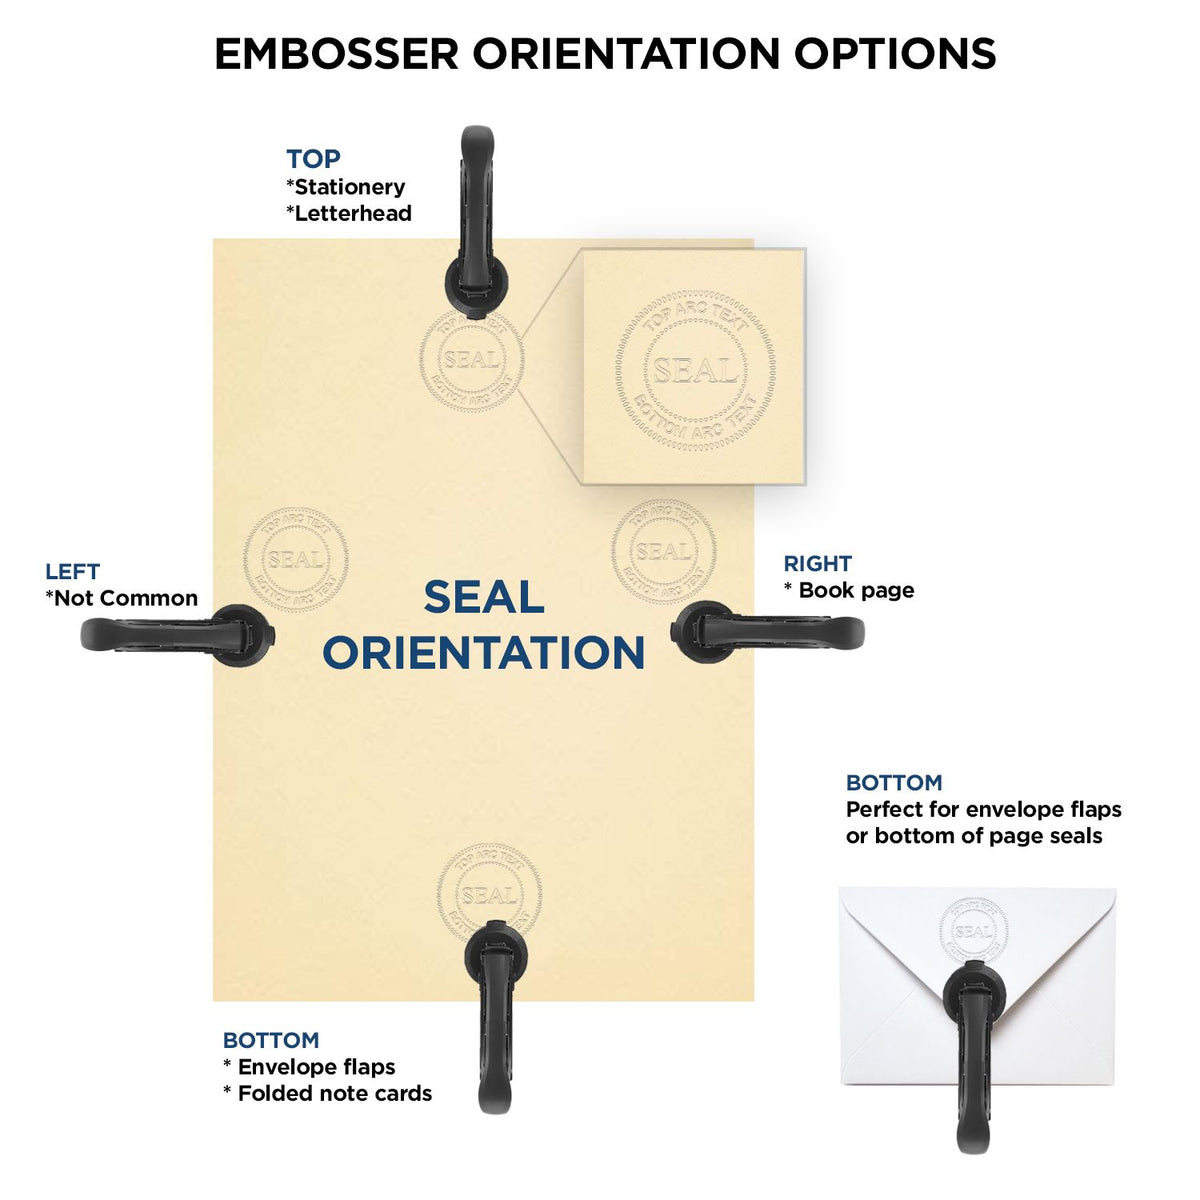 An infographic for the Washington Desk Architect Embossing Seal showing embosser orientation, this is showing examples of a top, bottom, right and left insert.